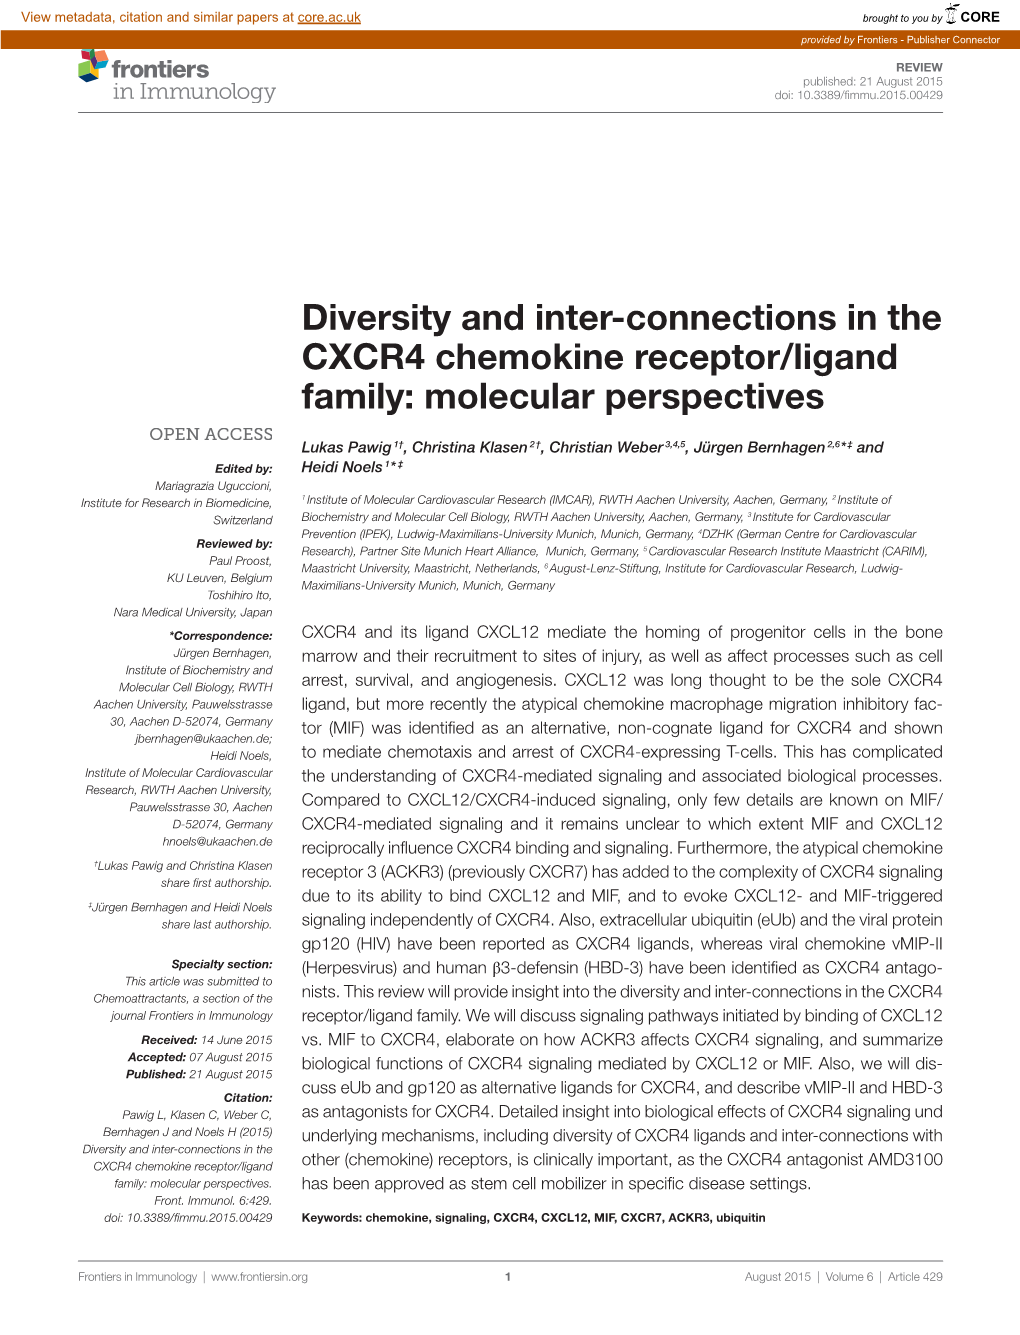 Diversity and Inter-Connections in the CXCR4 Chemokine Receptor/Ligand Family: Molecular Perspectives